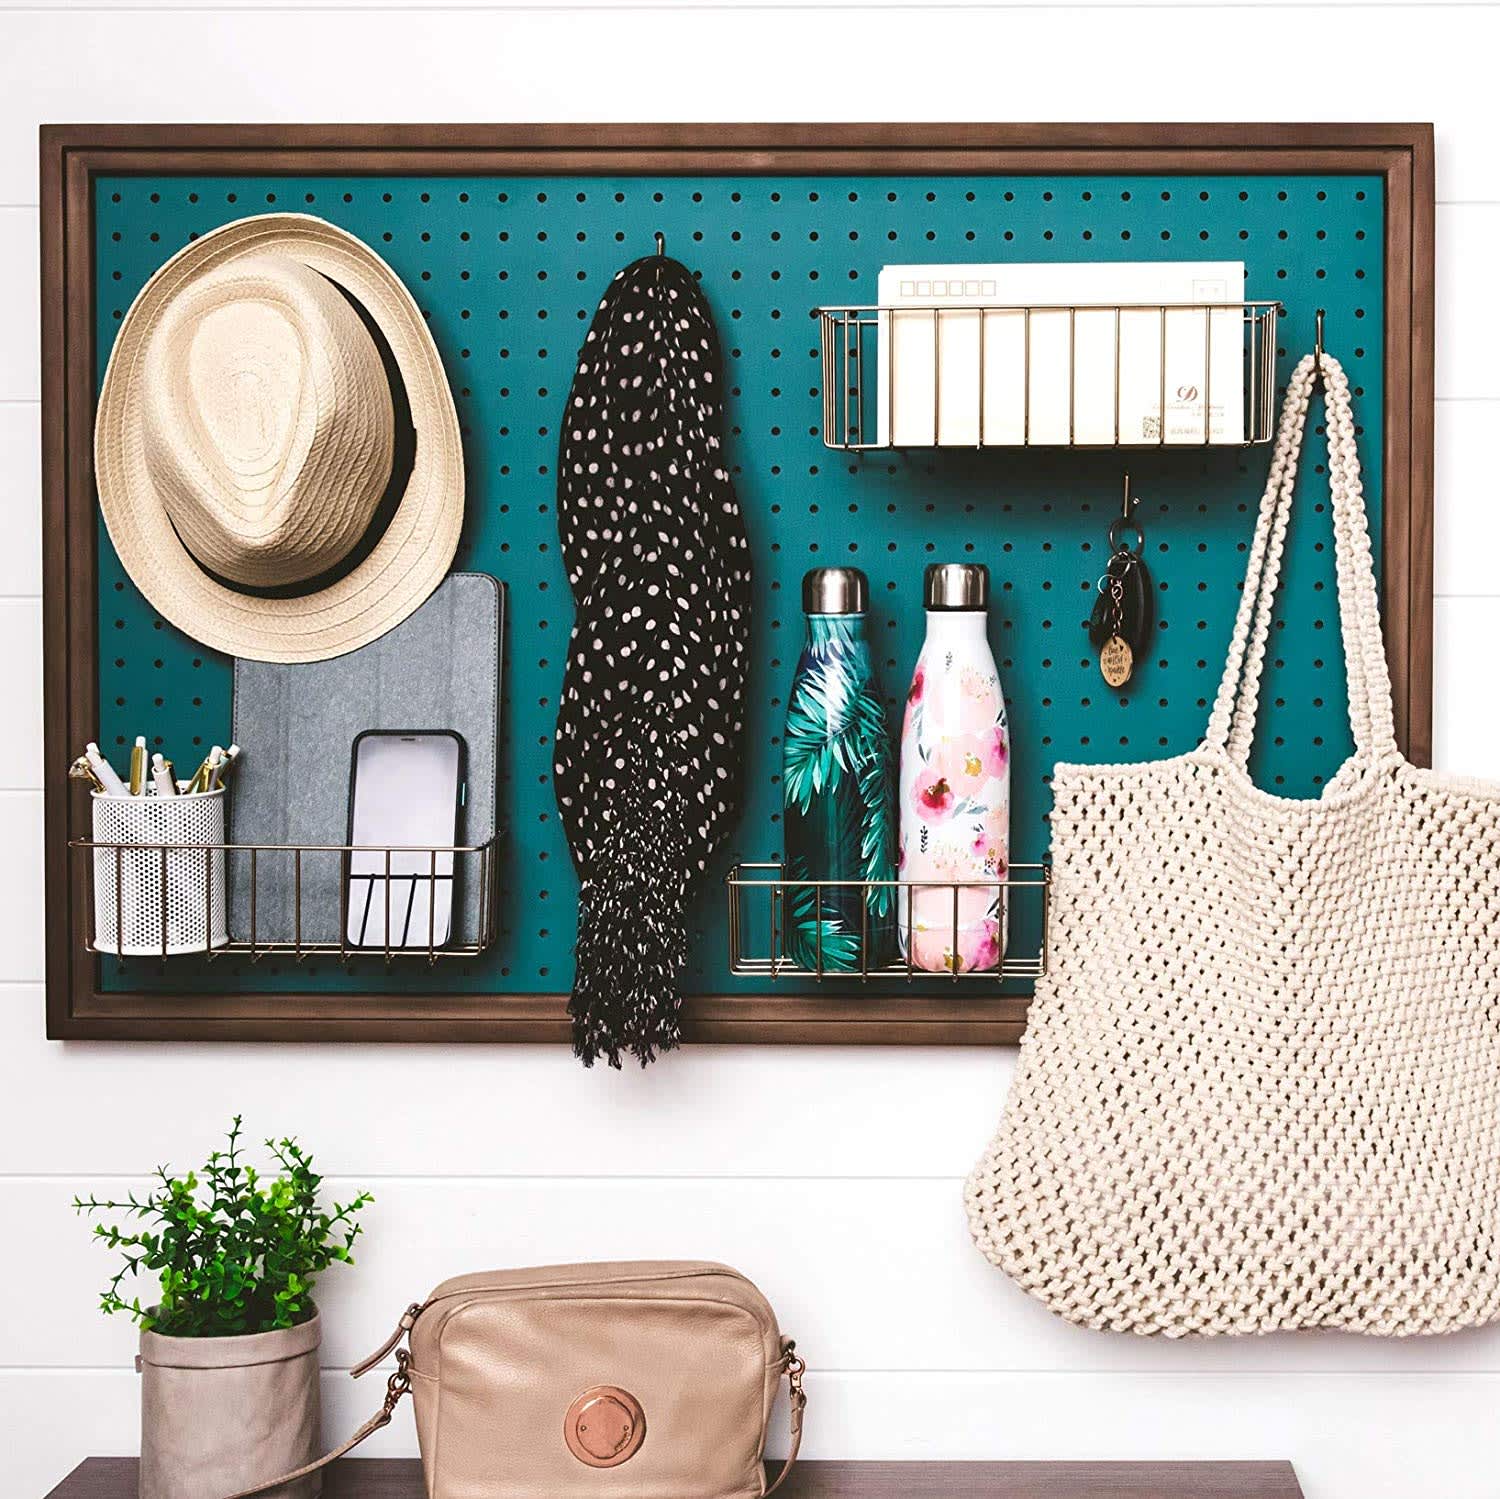 8 Must-Haves For An Organized Entryway - Small Stuff Counts